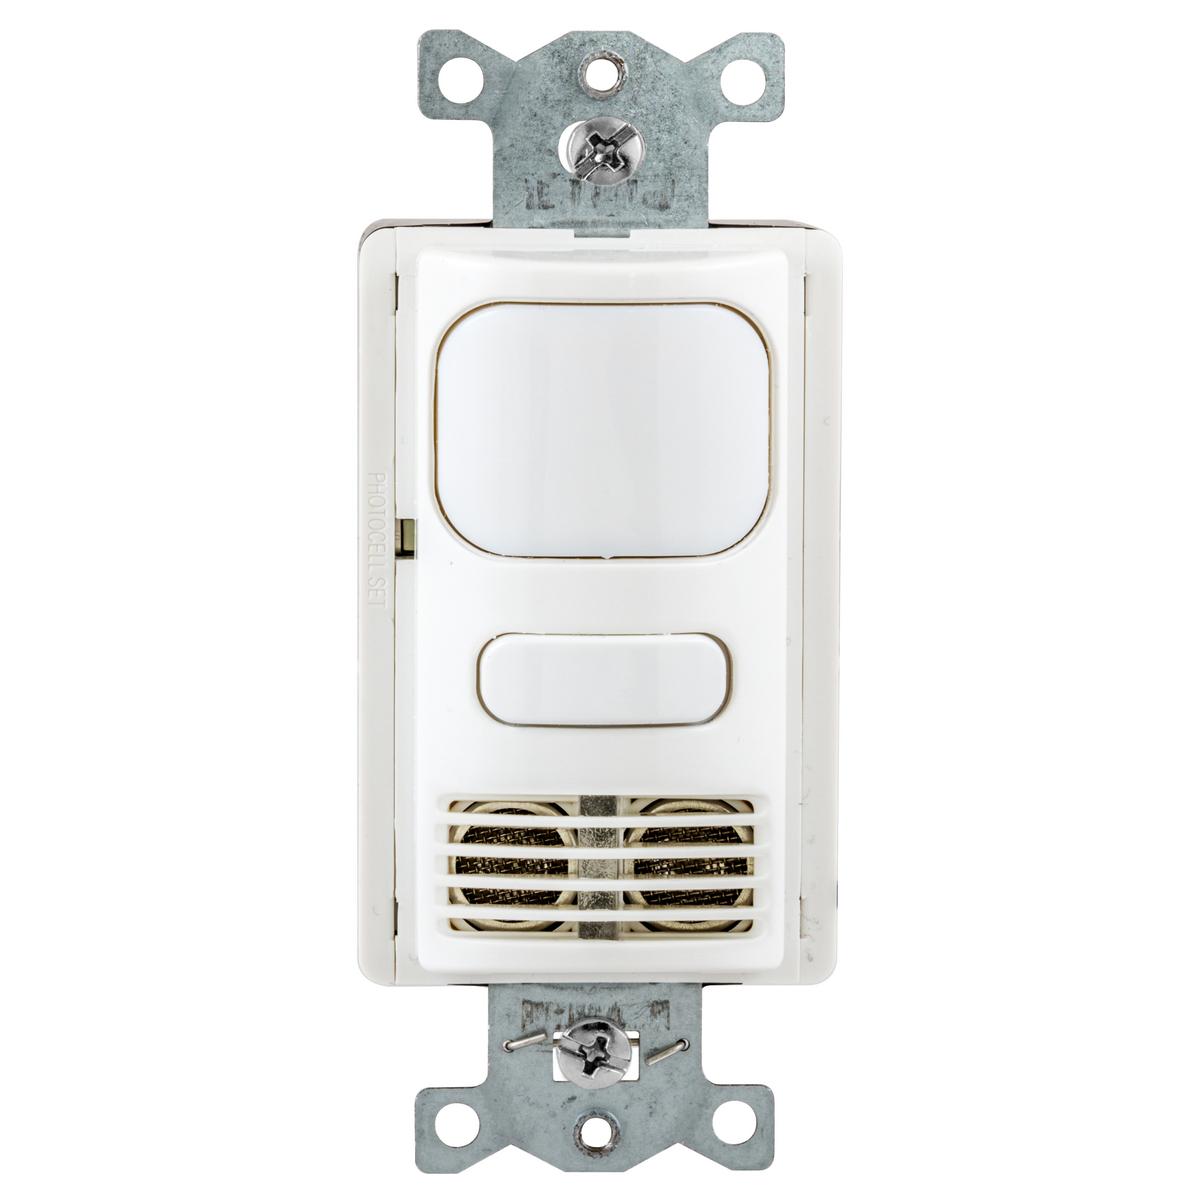 Hubbell AD2240W1 Occupancy/Vacancy Sensors, Wall Switch,Adaptive Dual Technology, 1 Circuit, 24V DC, White 